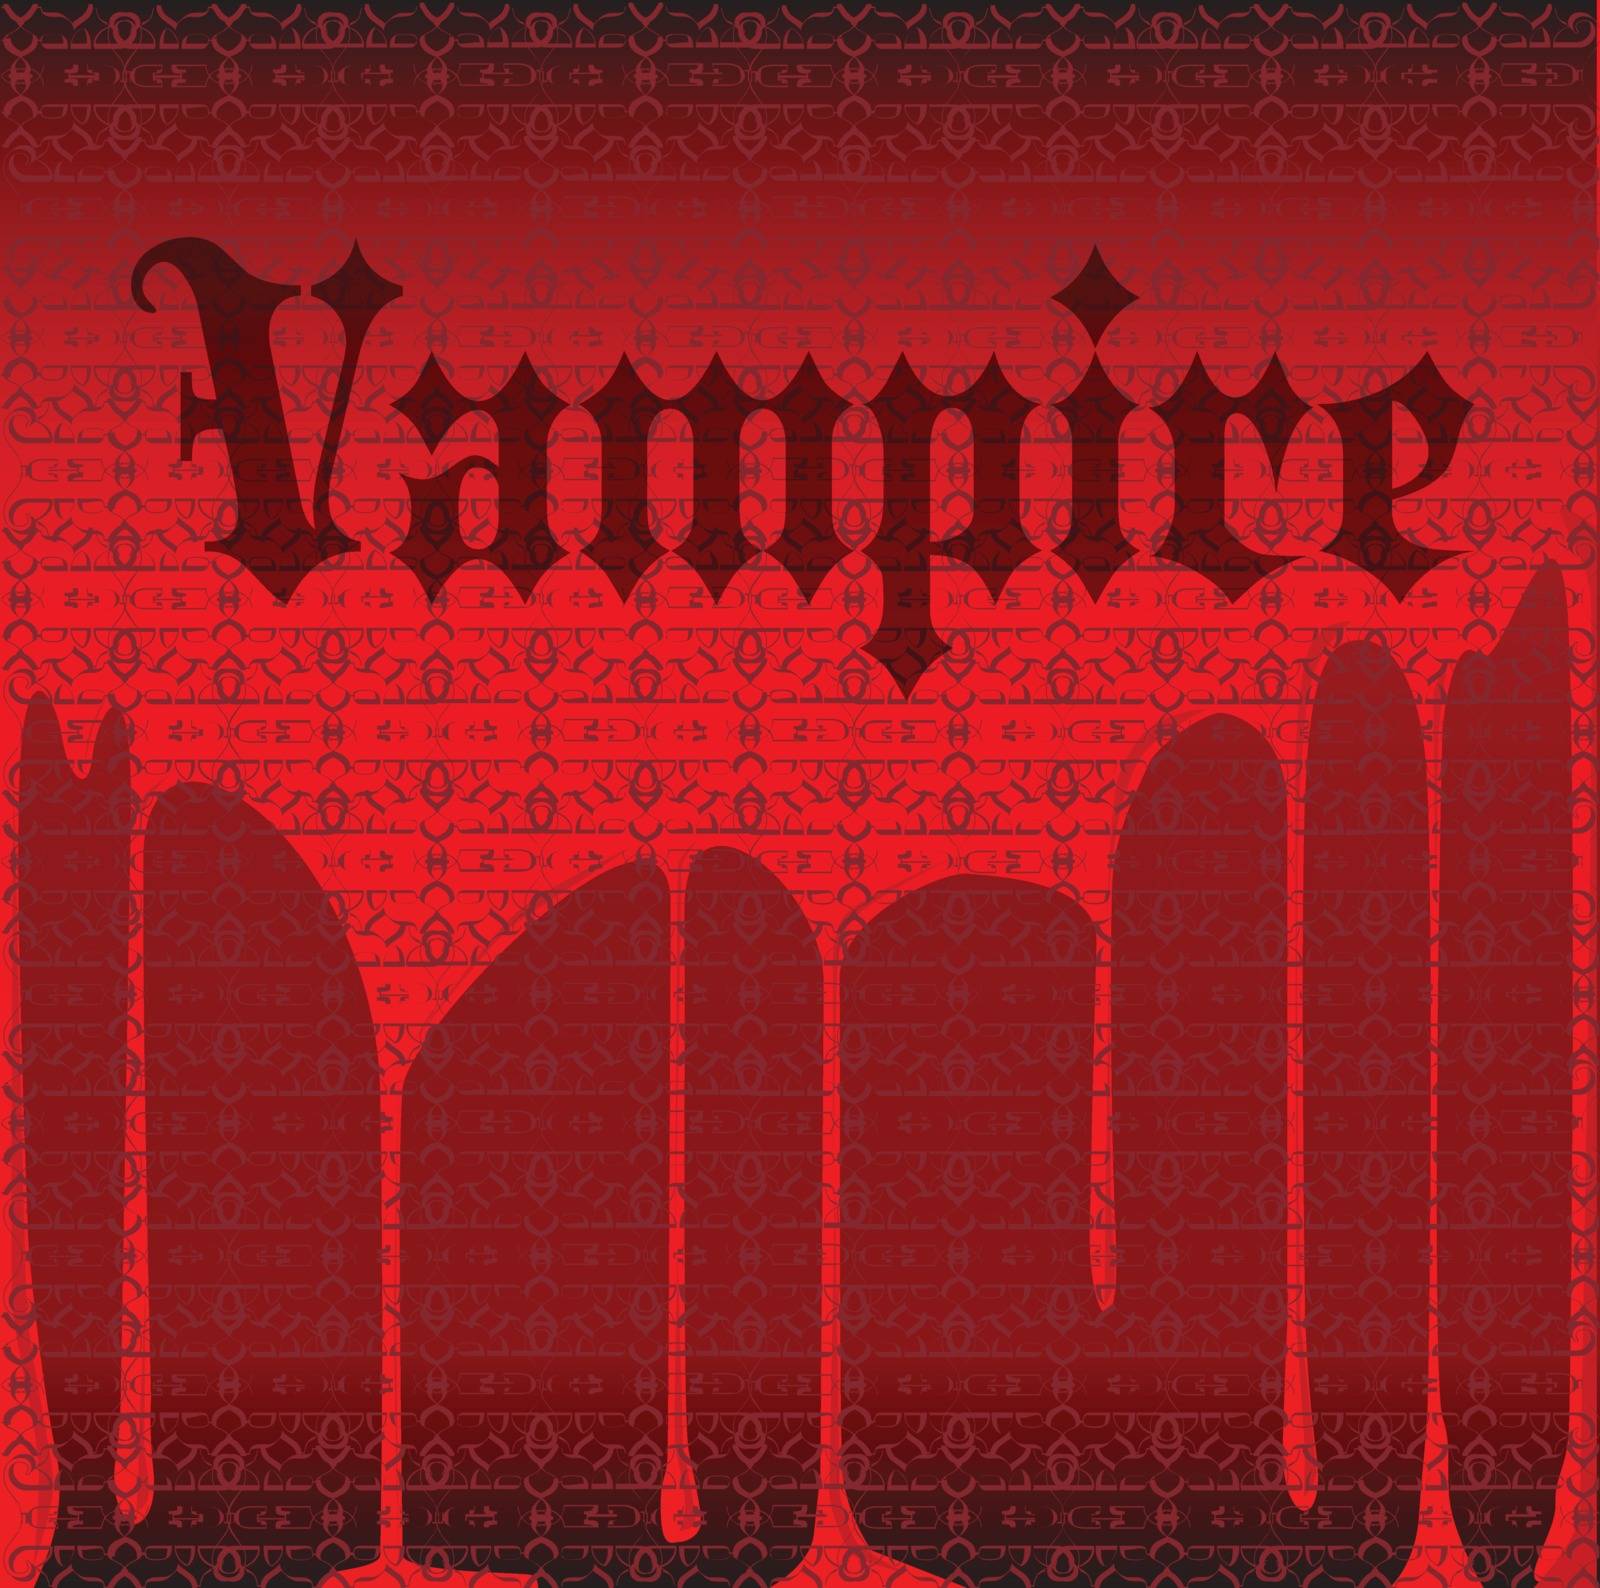 A blood red background with linked pattern and the text Vampire